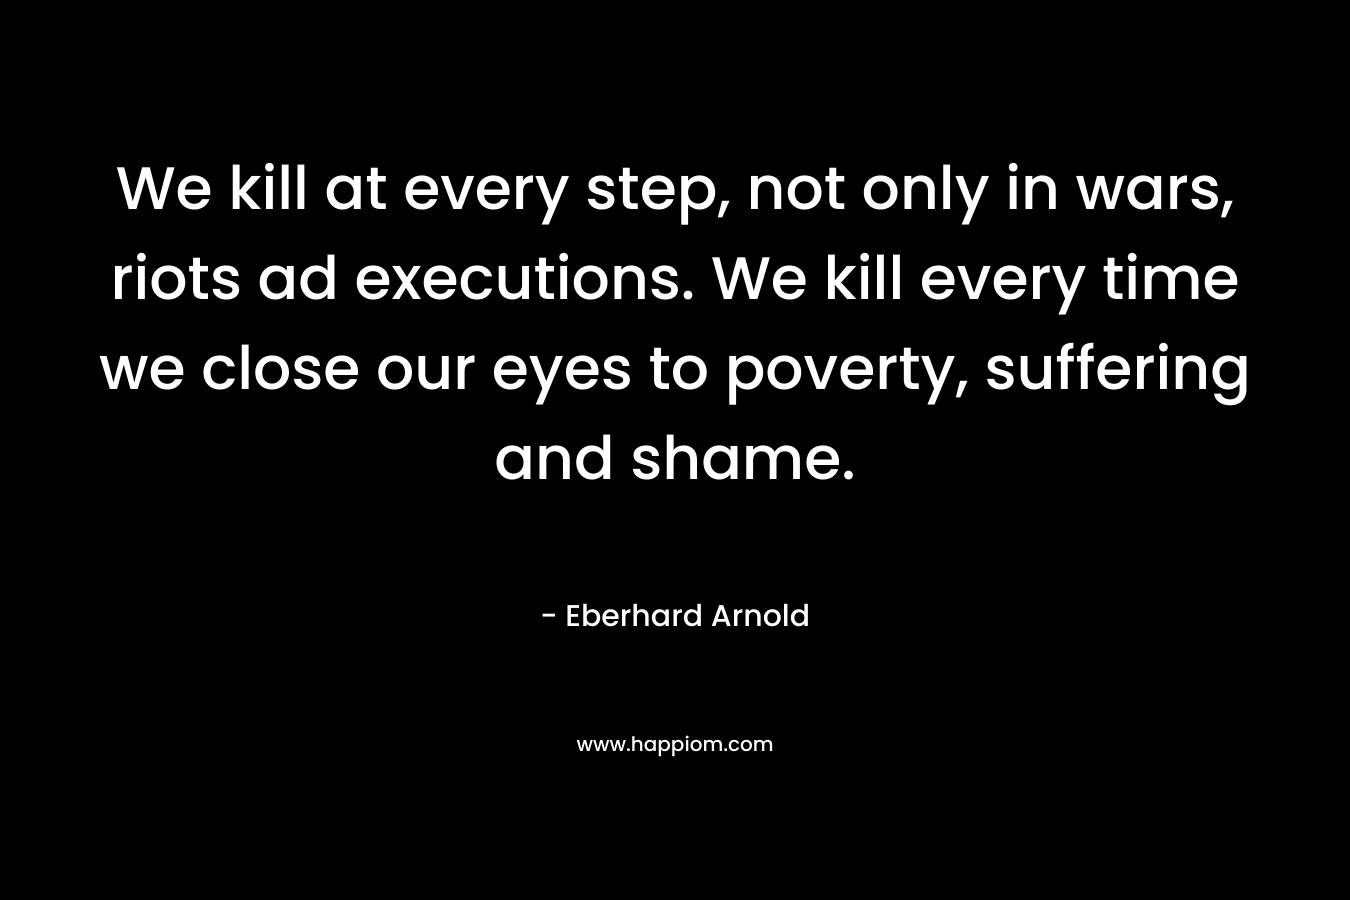 We kill at every step, not only in wars, riots ad executions. We kill every time we close our eyes to poverty, suffering and shame. – Eberhard Arnold